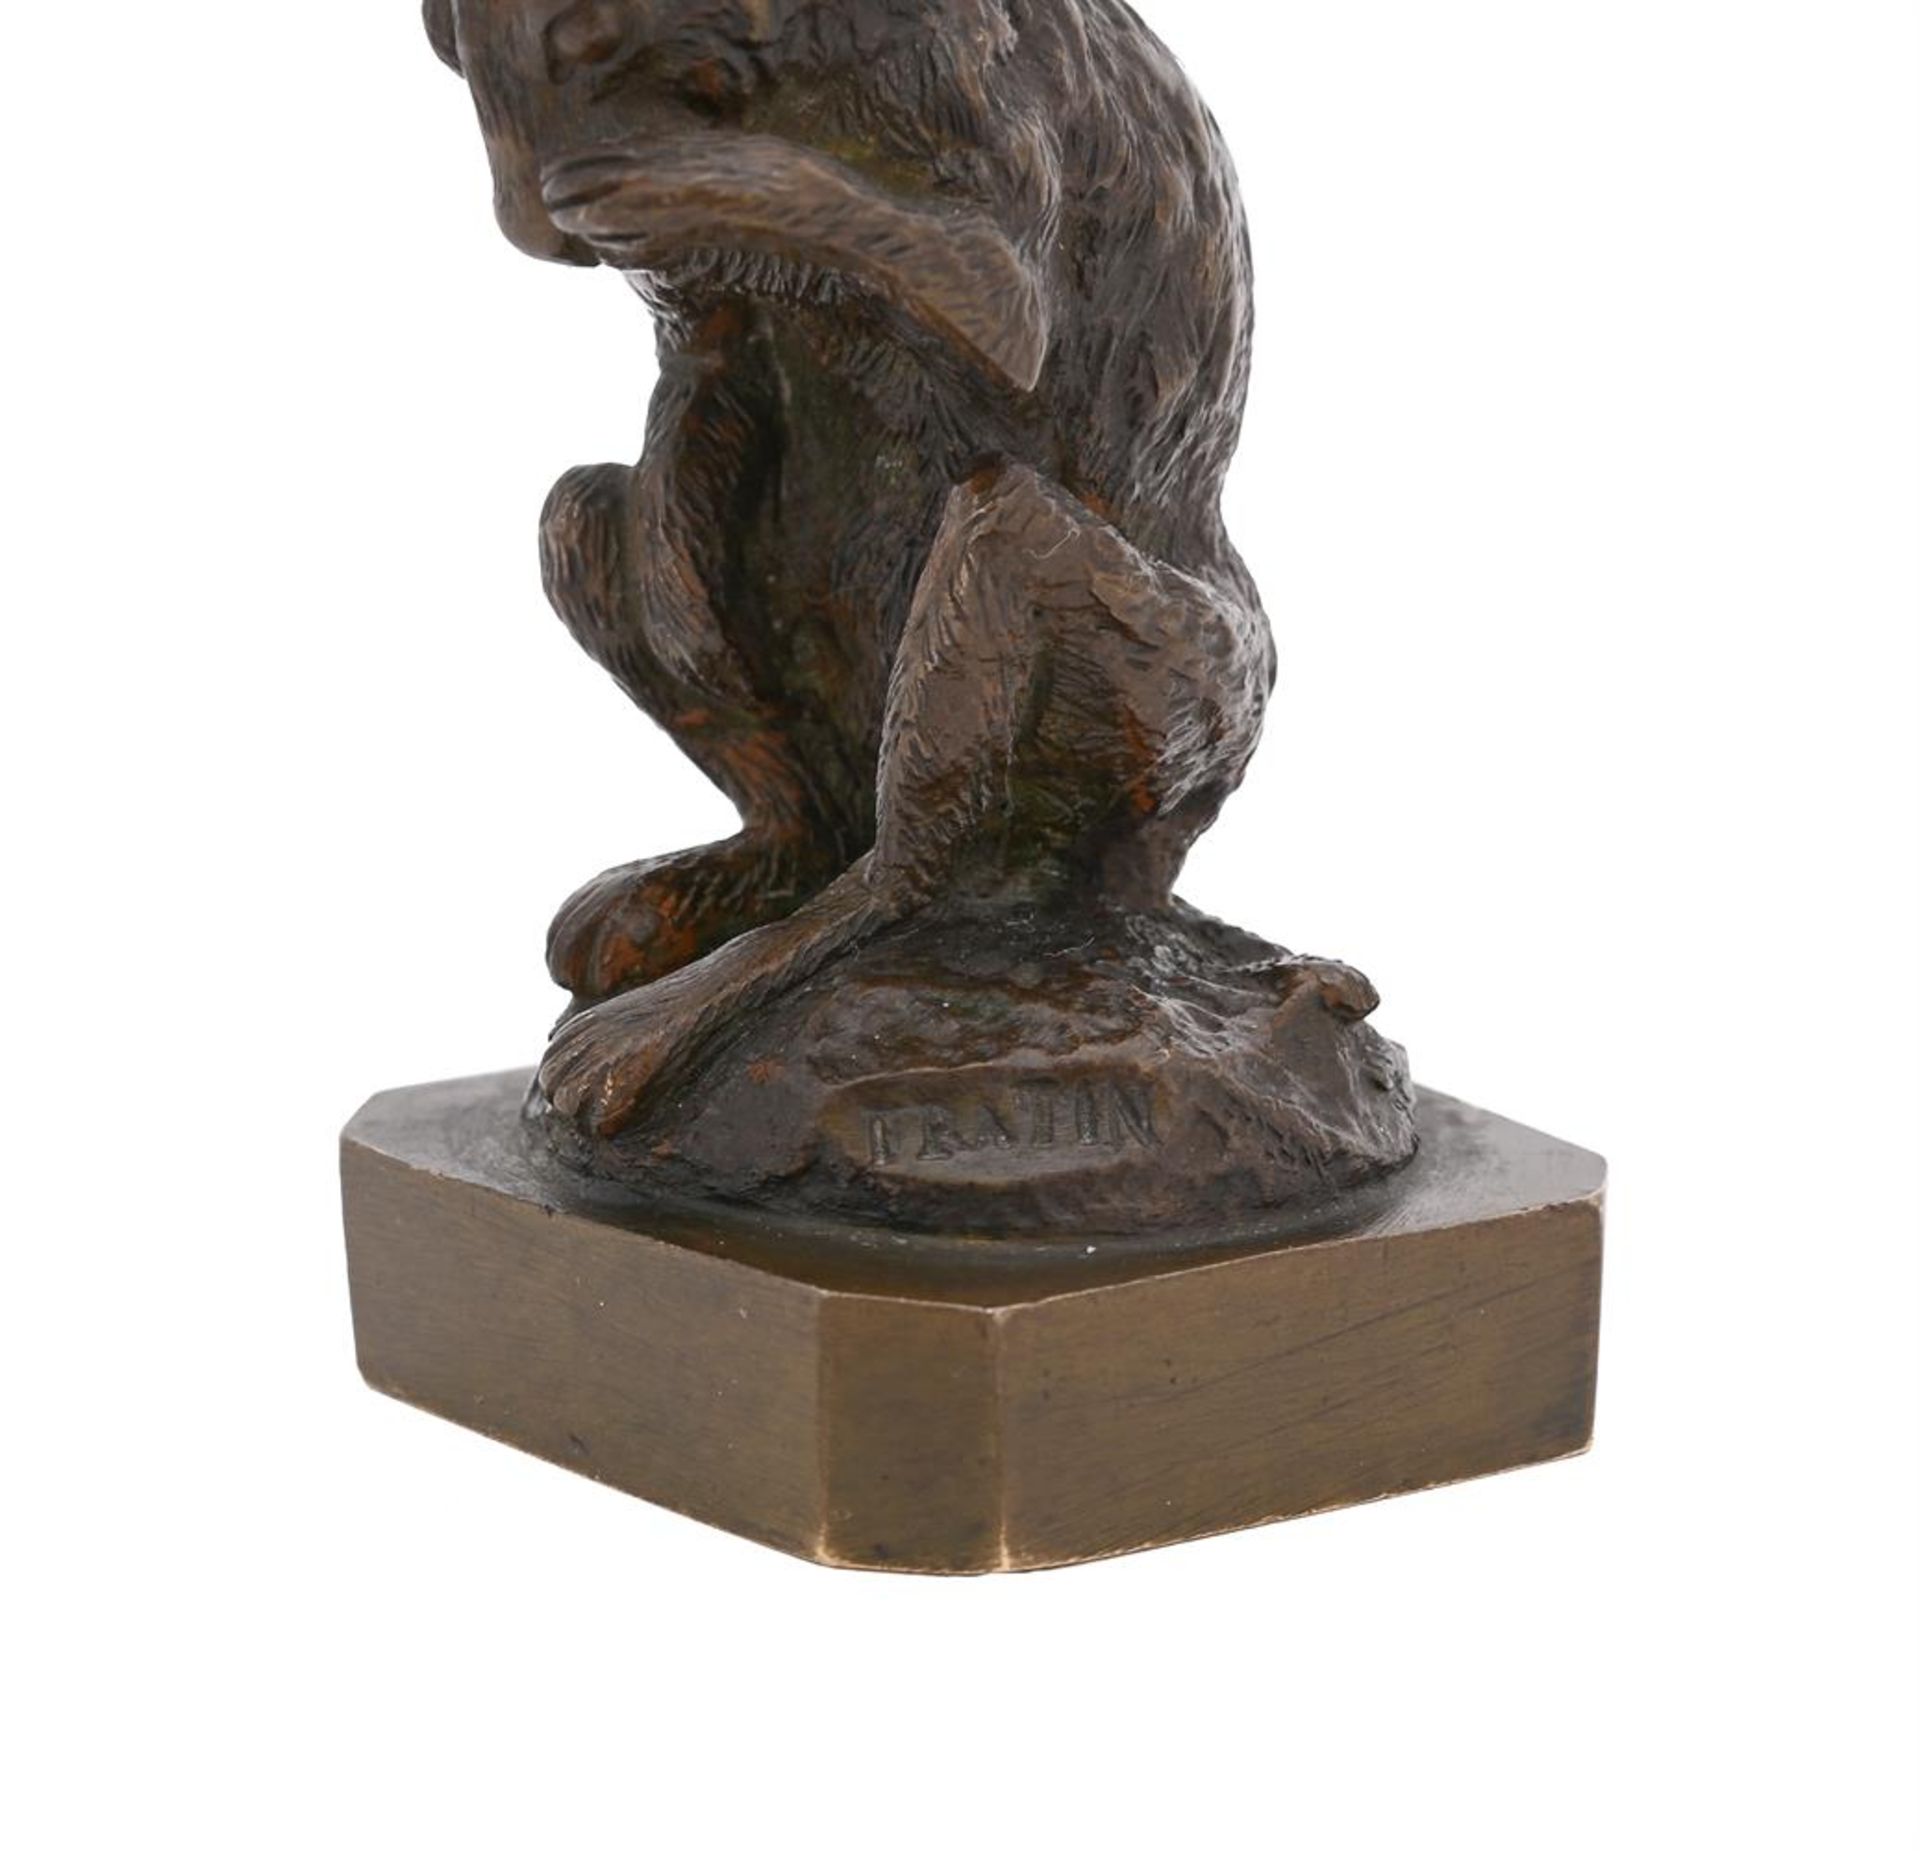 CHRISTOPHE FRATIN (FRENCH, 1801-1864), A BRONZE MODEL OF A HARE GROOMING ITS FACE - Image 4 of 6